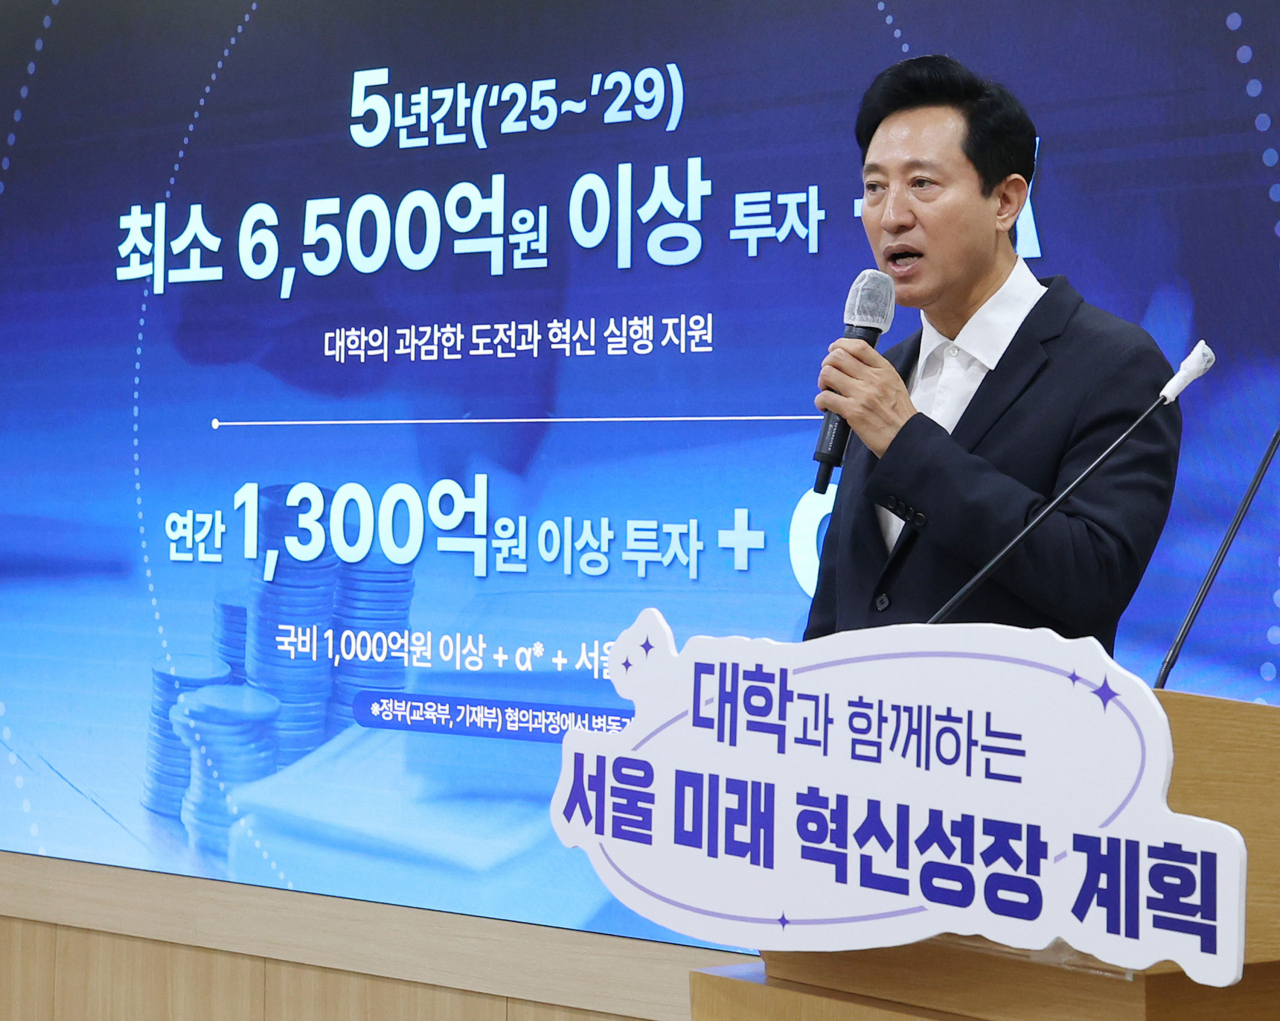 Seoul Mayor Oh Se-hoon speaks during a press briefing Tuesday on the city government's investment plans for universities based in Seoul. (Yonhap)